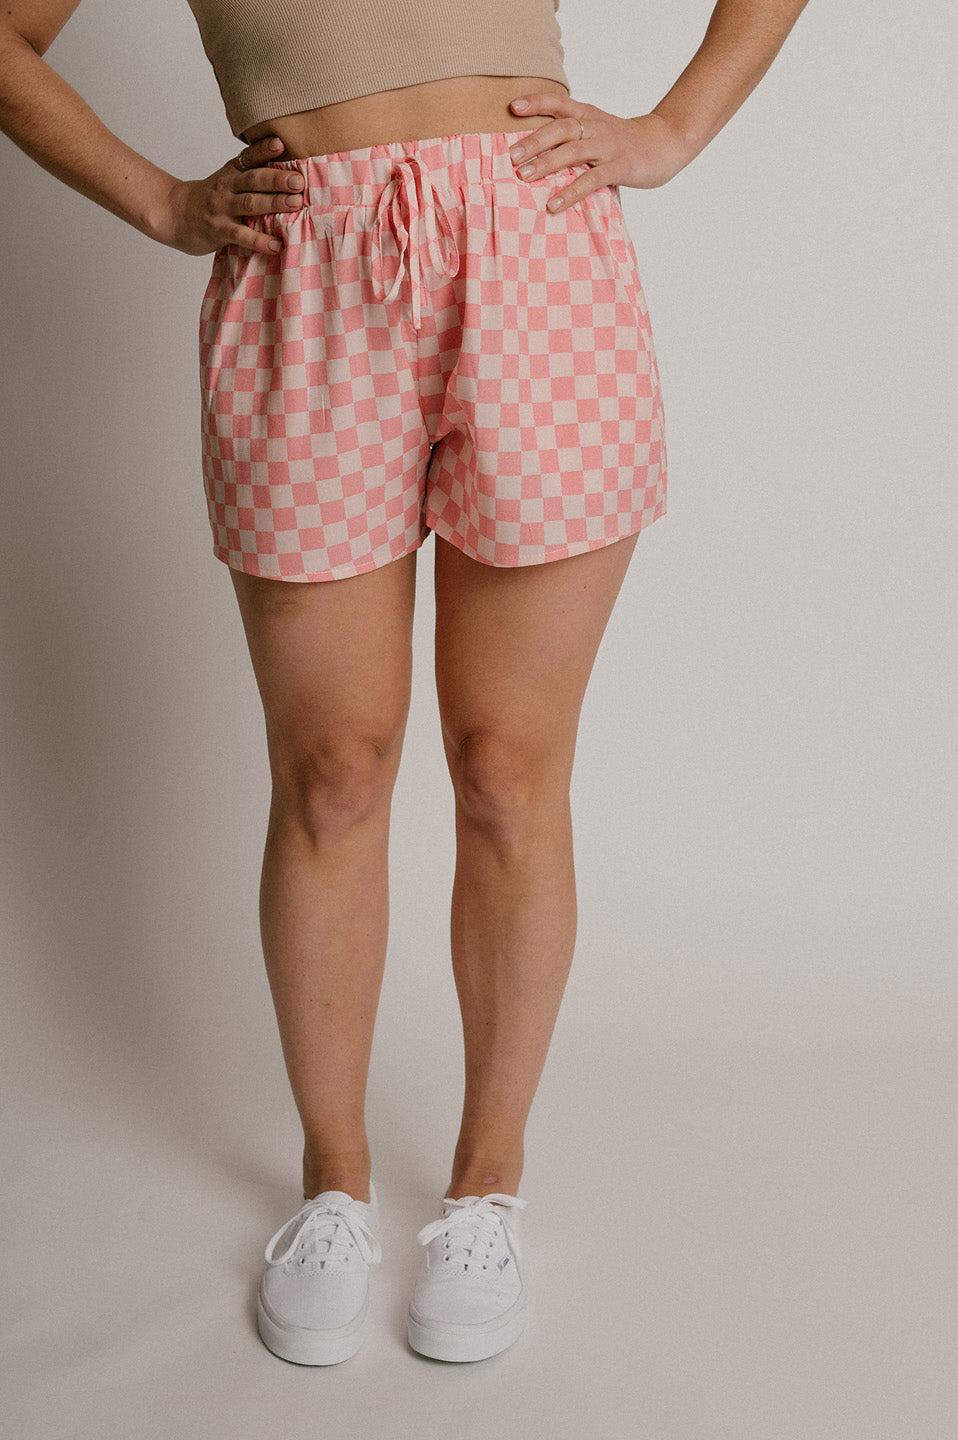 ALL CHECKS OUT SHORTS-PINK-FINAL SALE